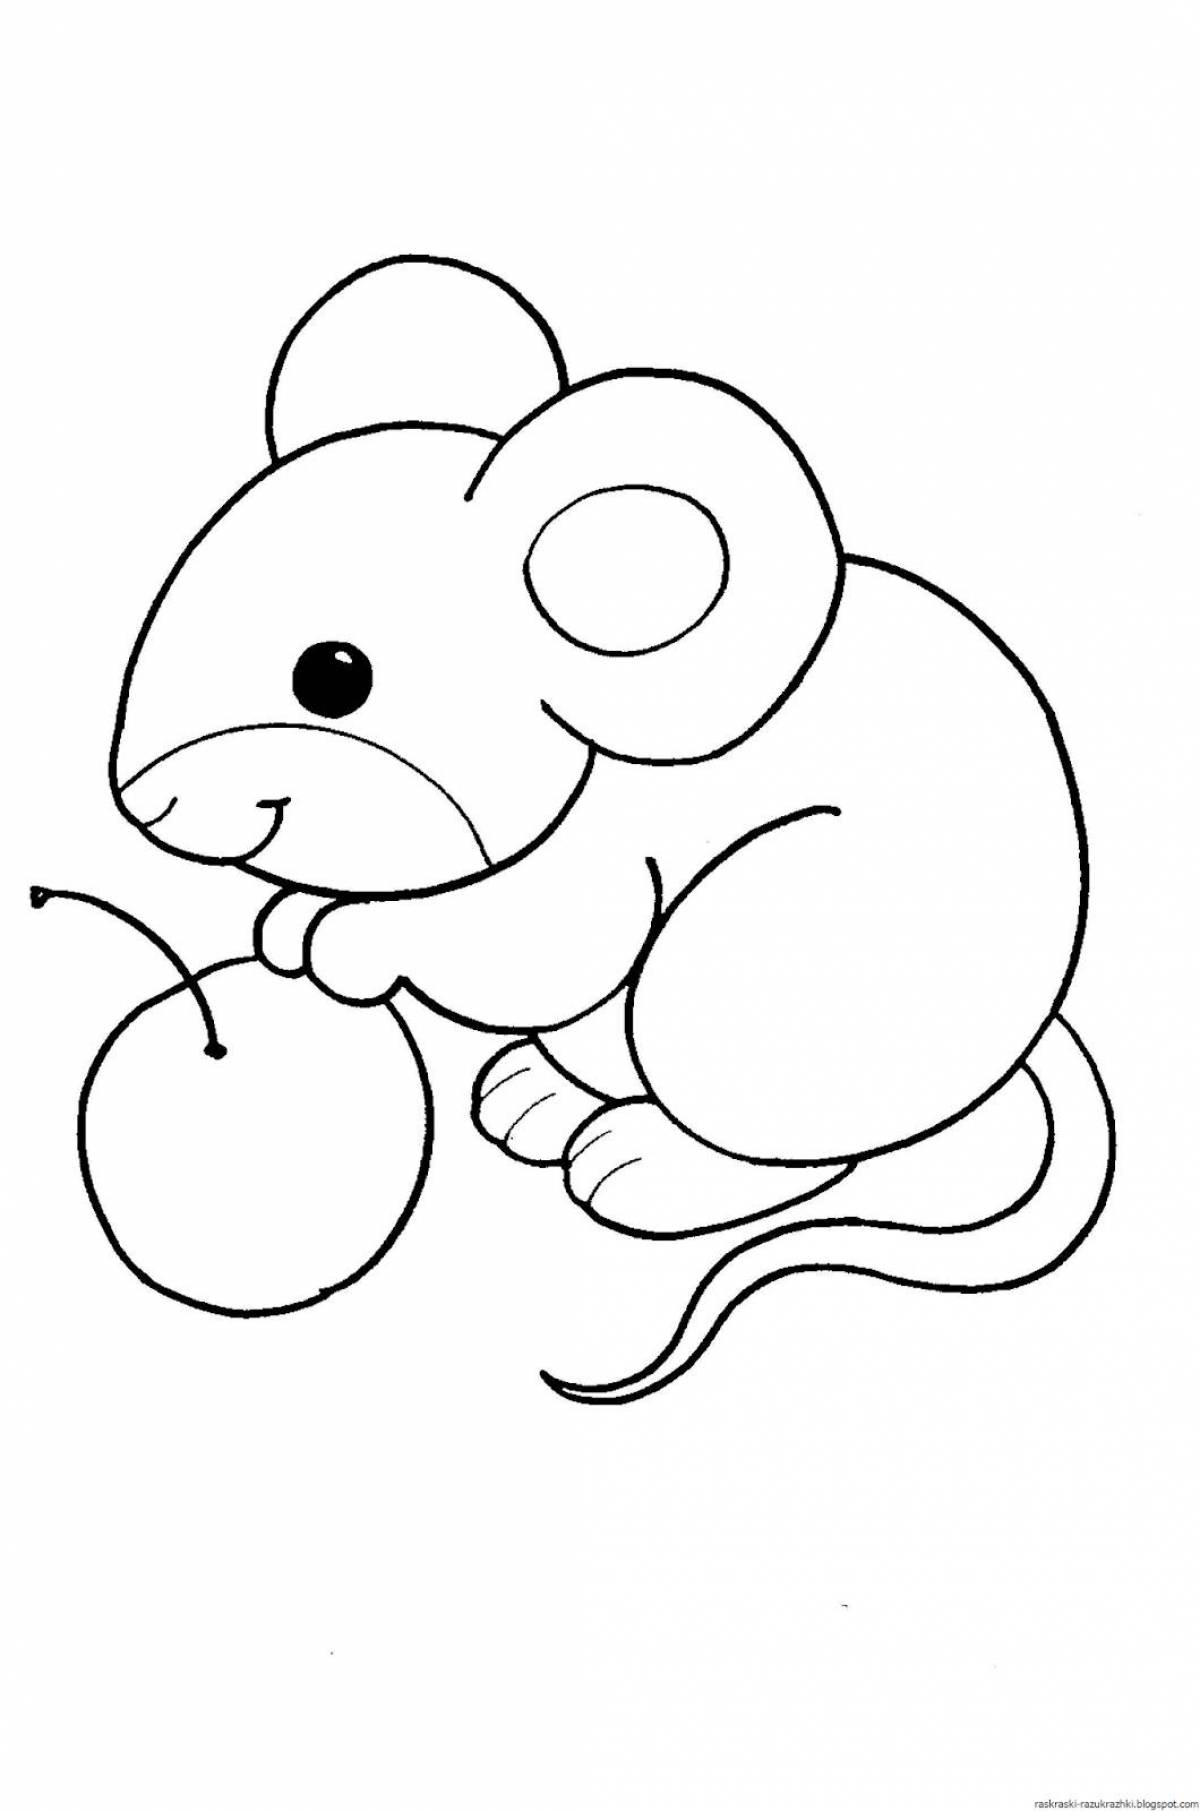 Mouse #12